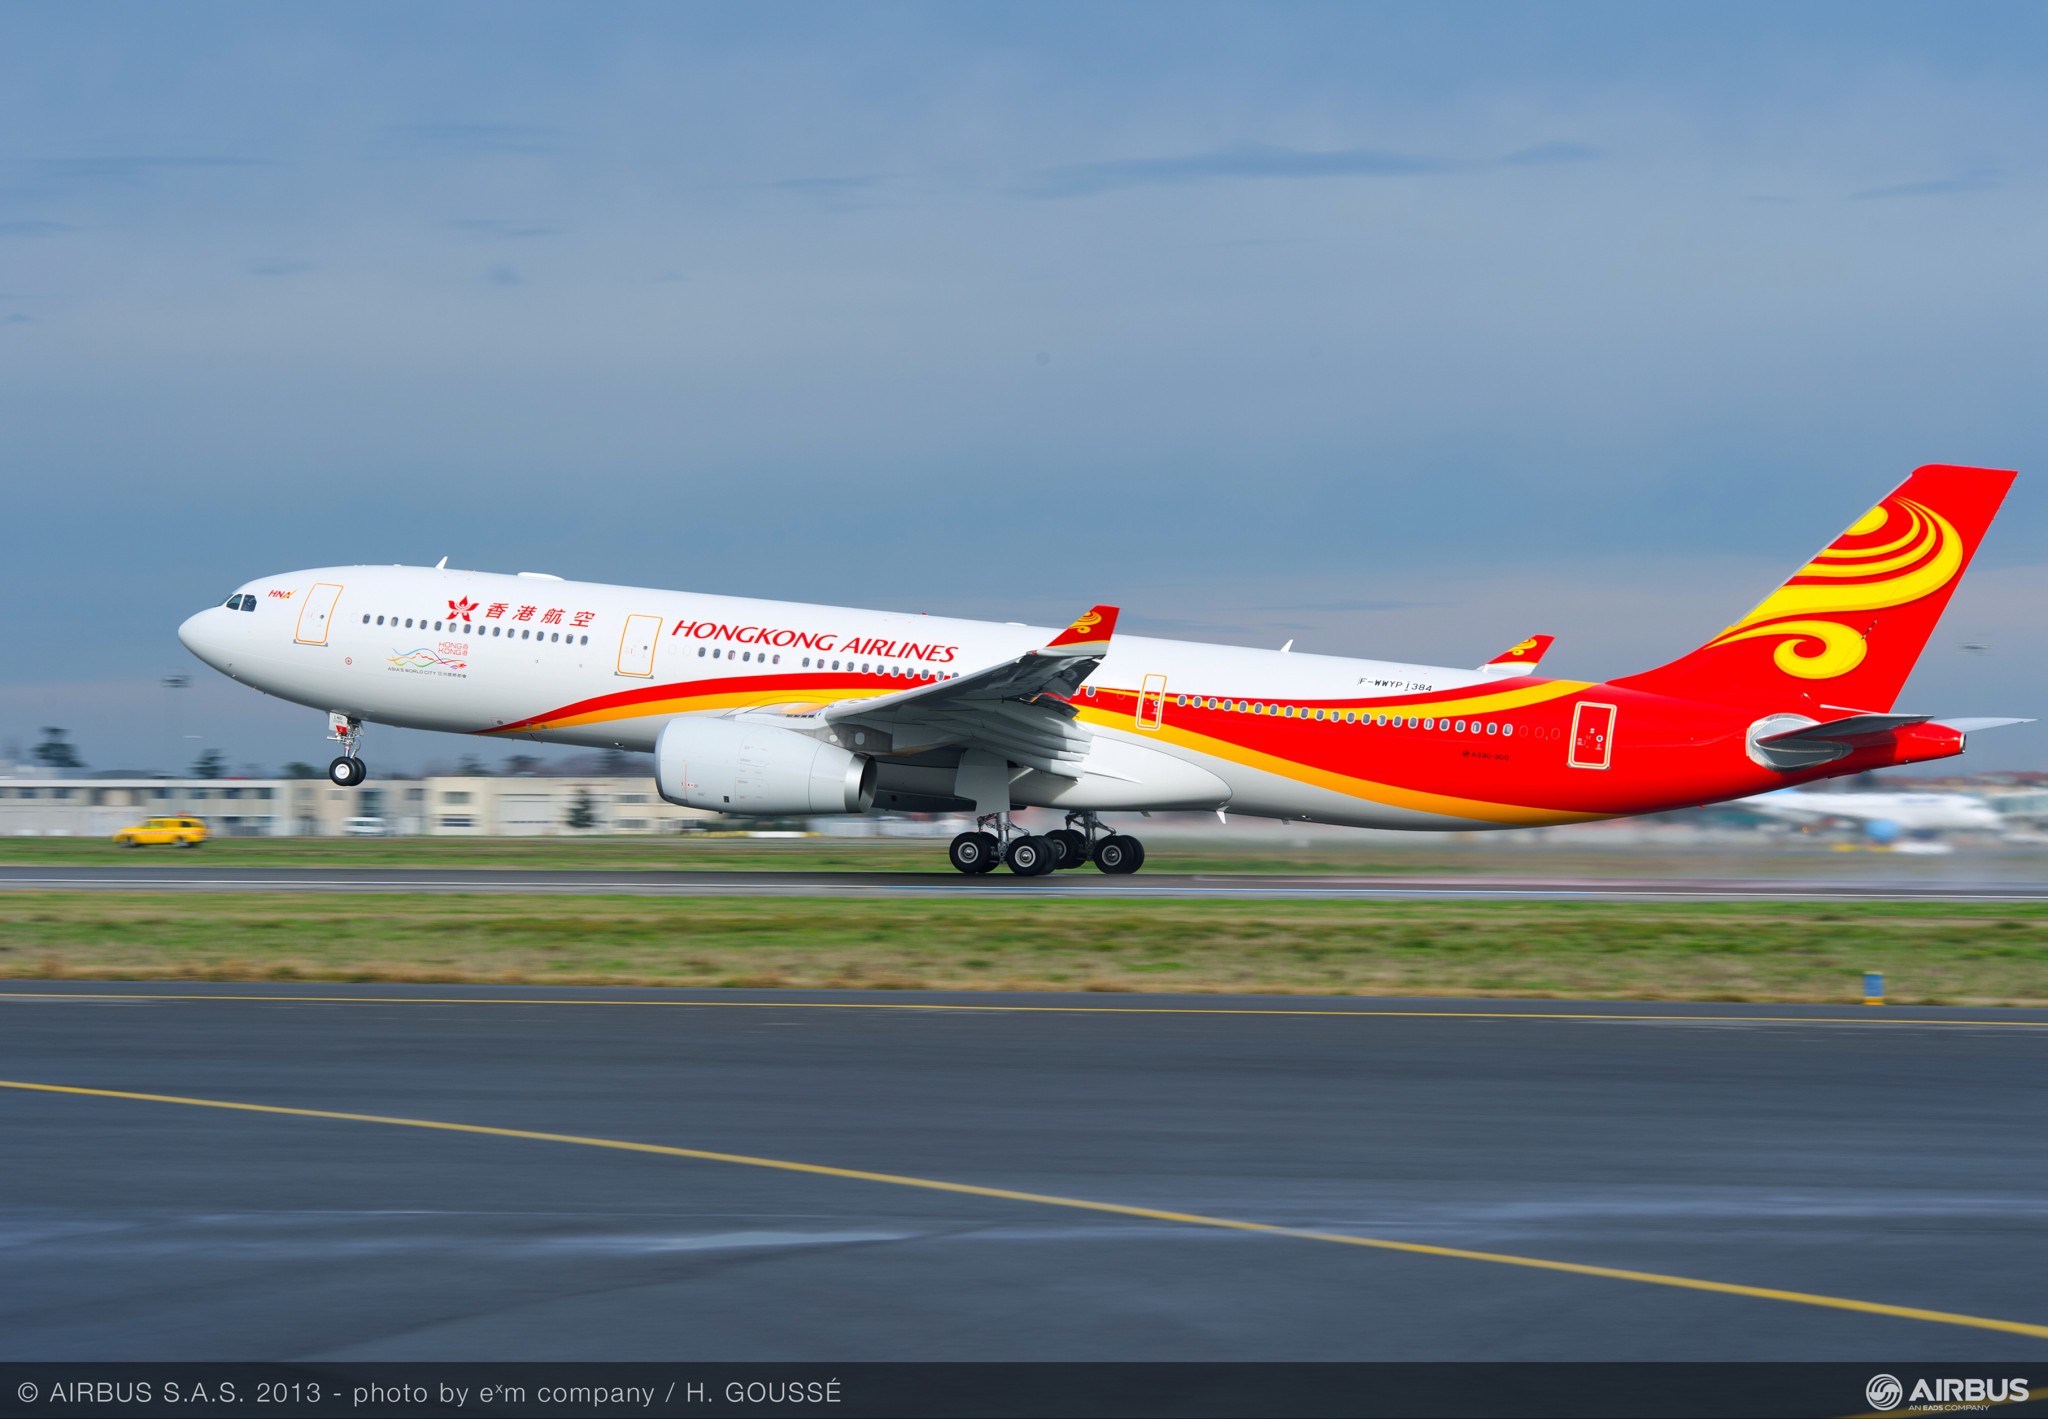 Hong Kong Airlines file for debt restructuring amounting to $6.2bn